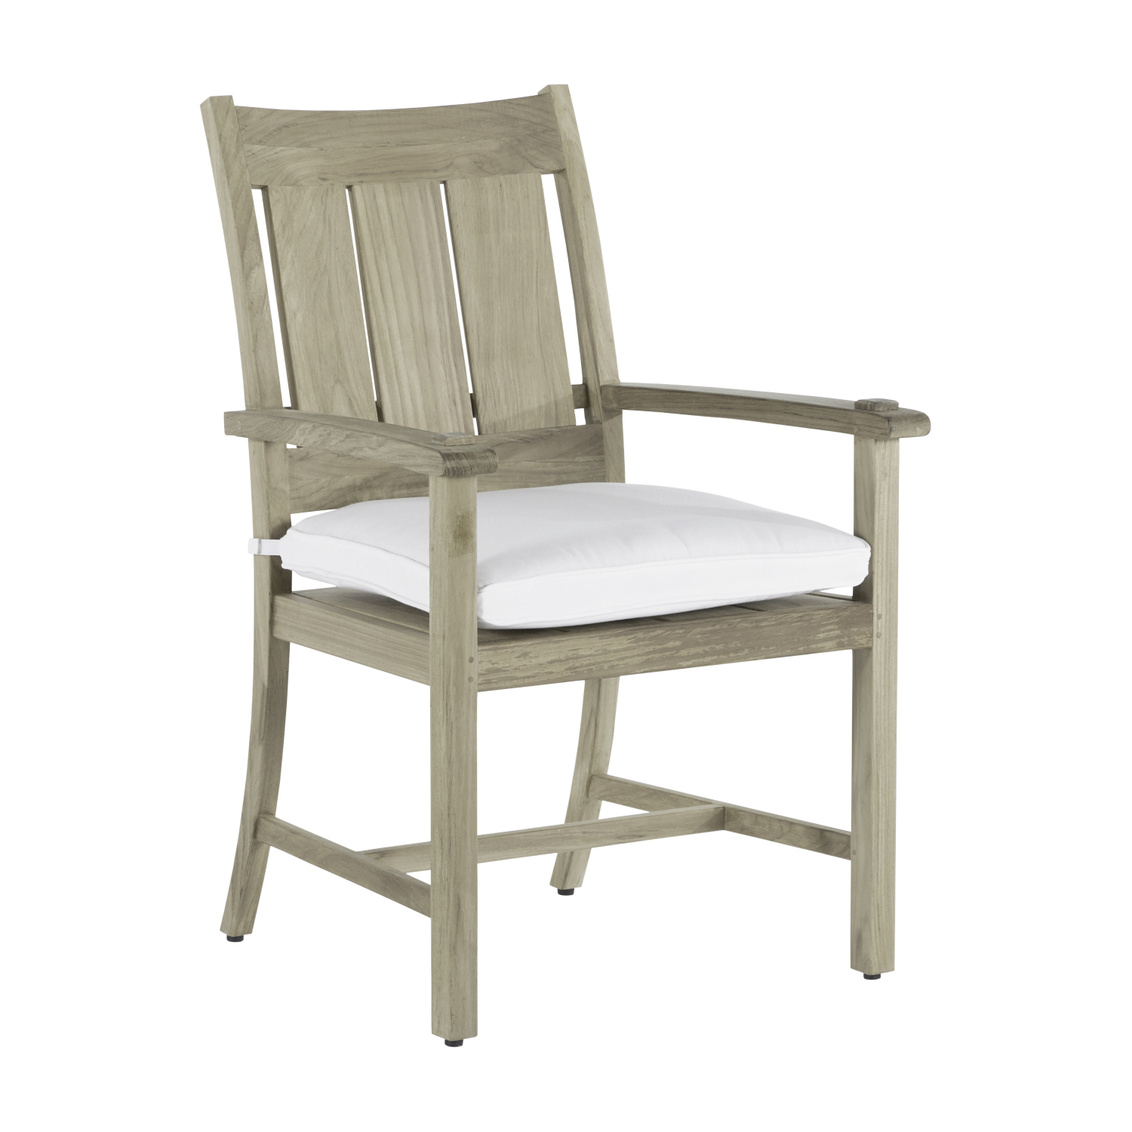 croquet teak arm chair in oyster teak – frame only product image